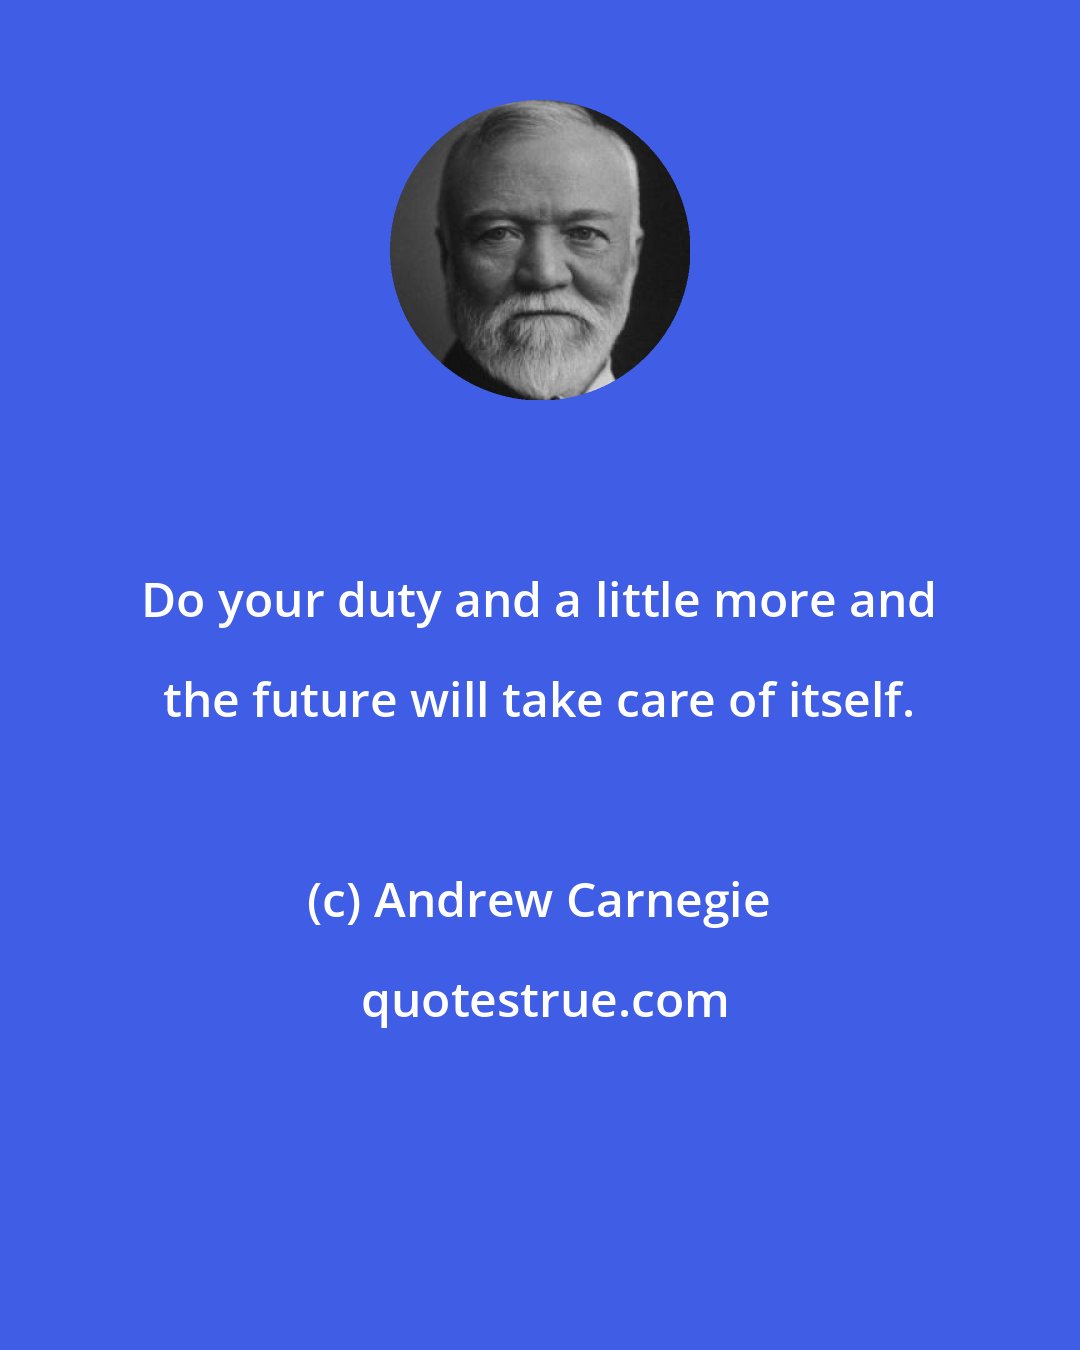 Andrew Carnegie: Do your duty and a little more and the future will take care of itself.